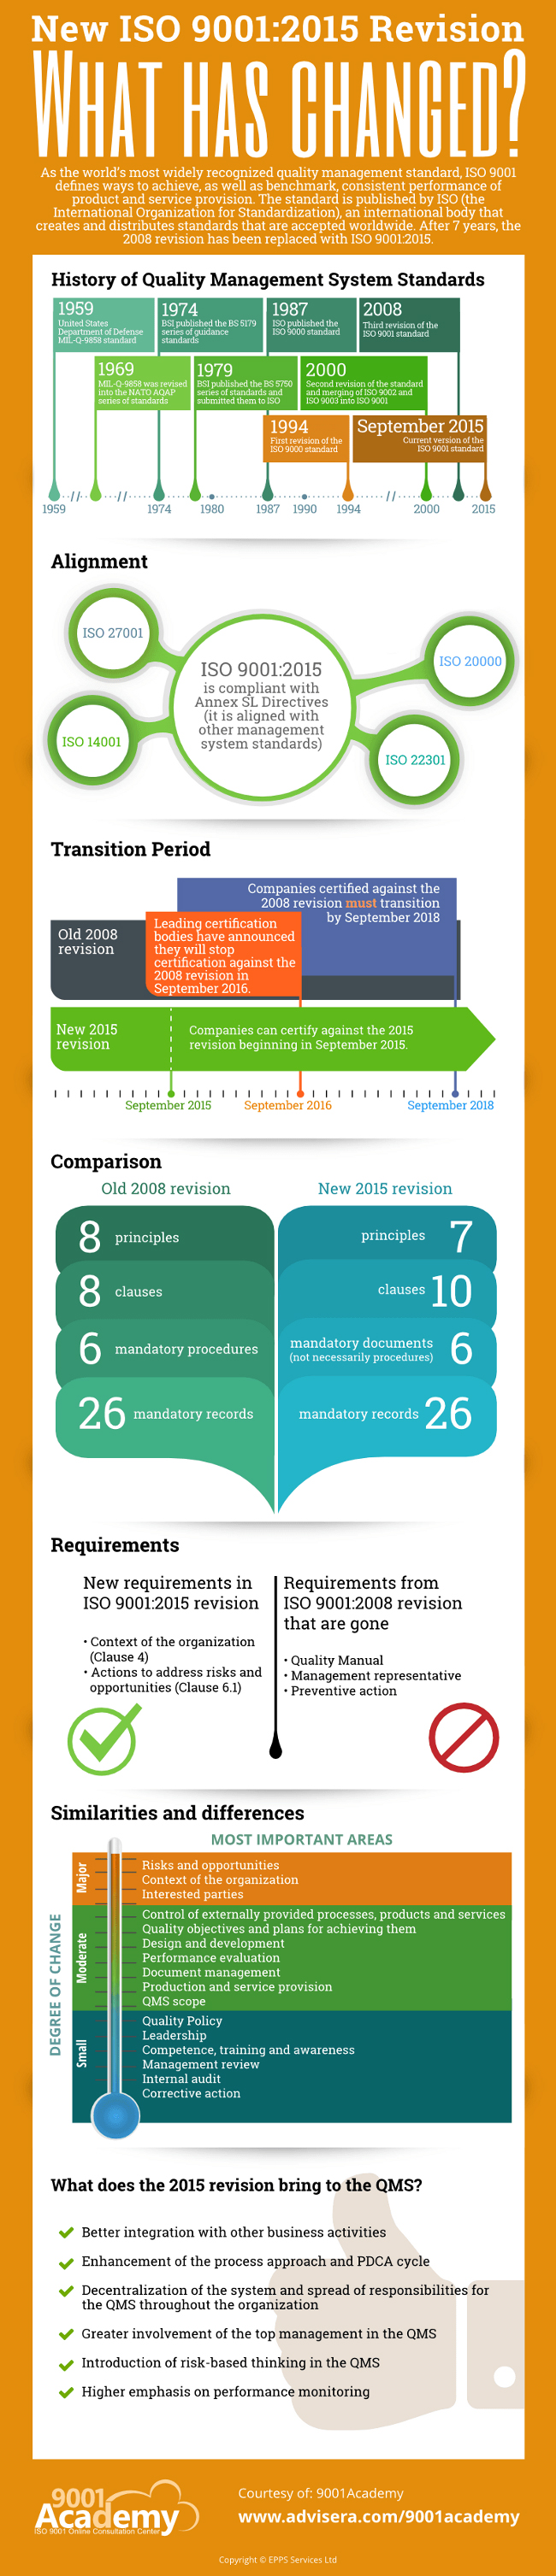 ISO 90012015 vs ISO 90012008 What Has Changed (Infographic)